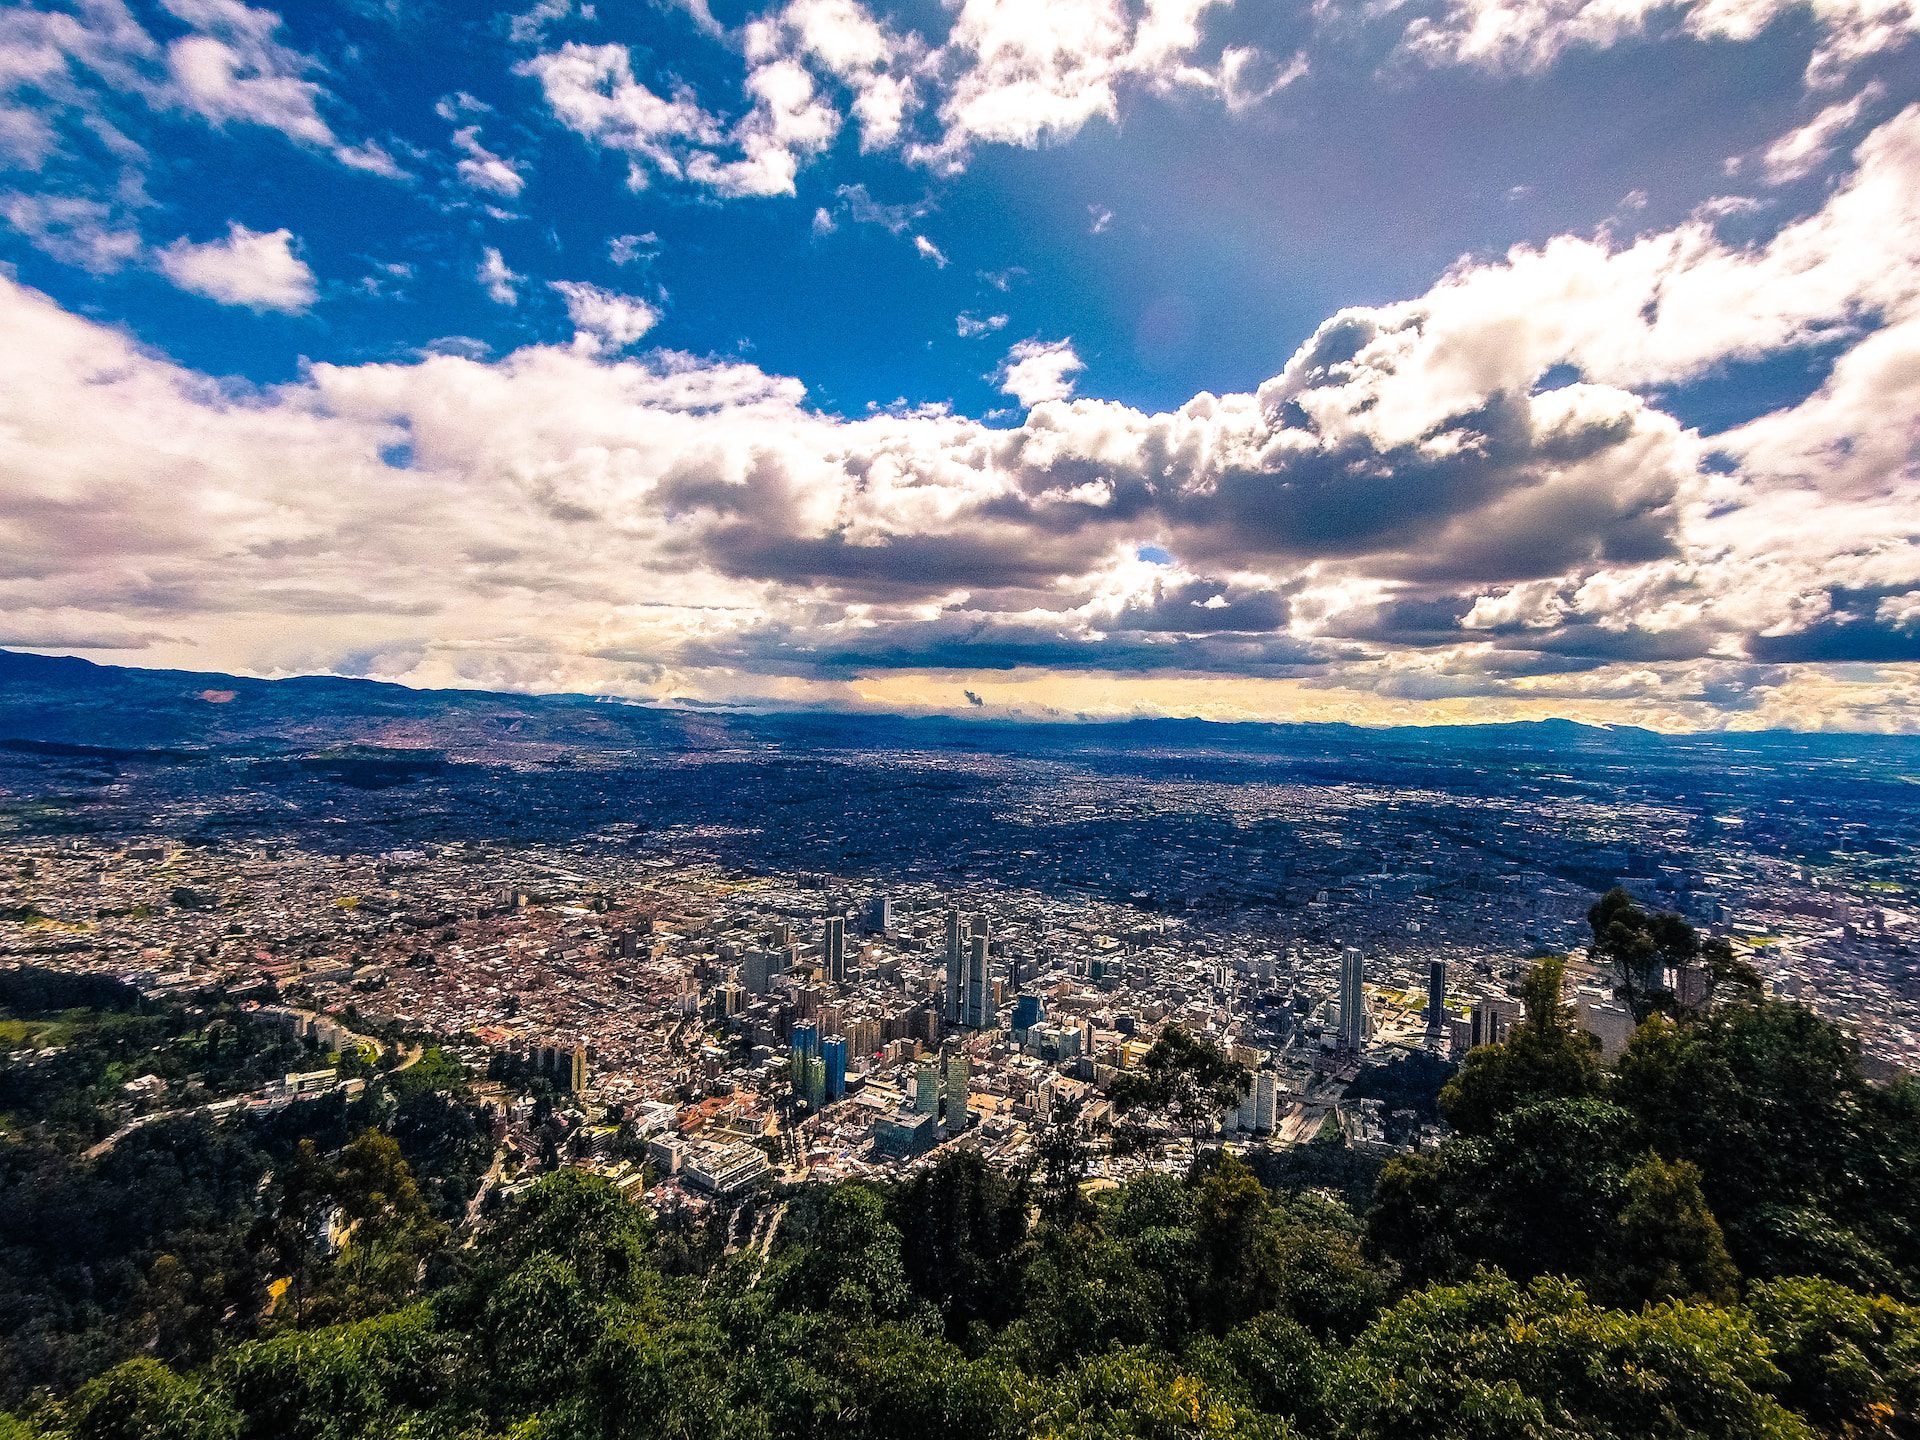 Panoramic views of Bogota, Colombia from the peak of Mount Monserrate.